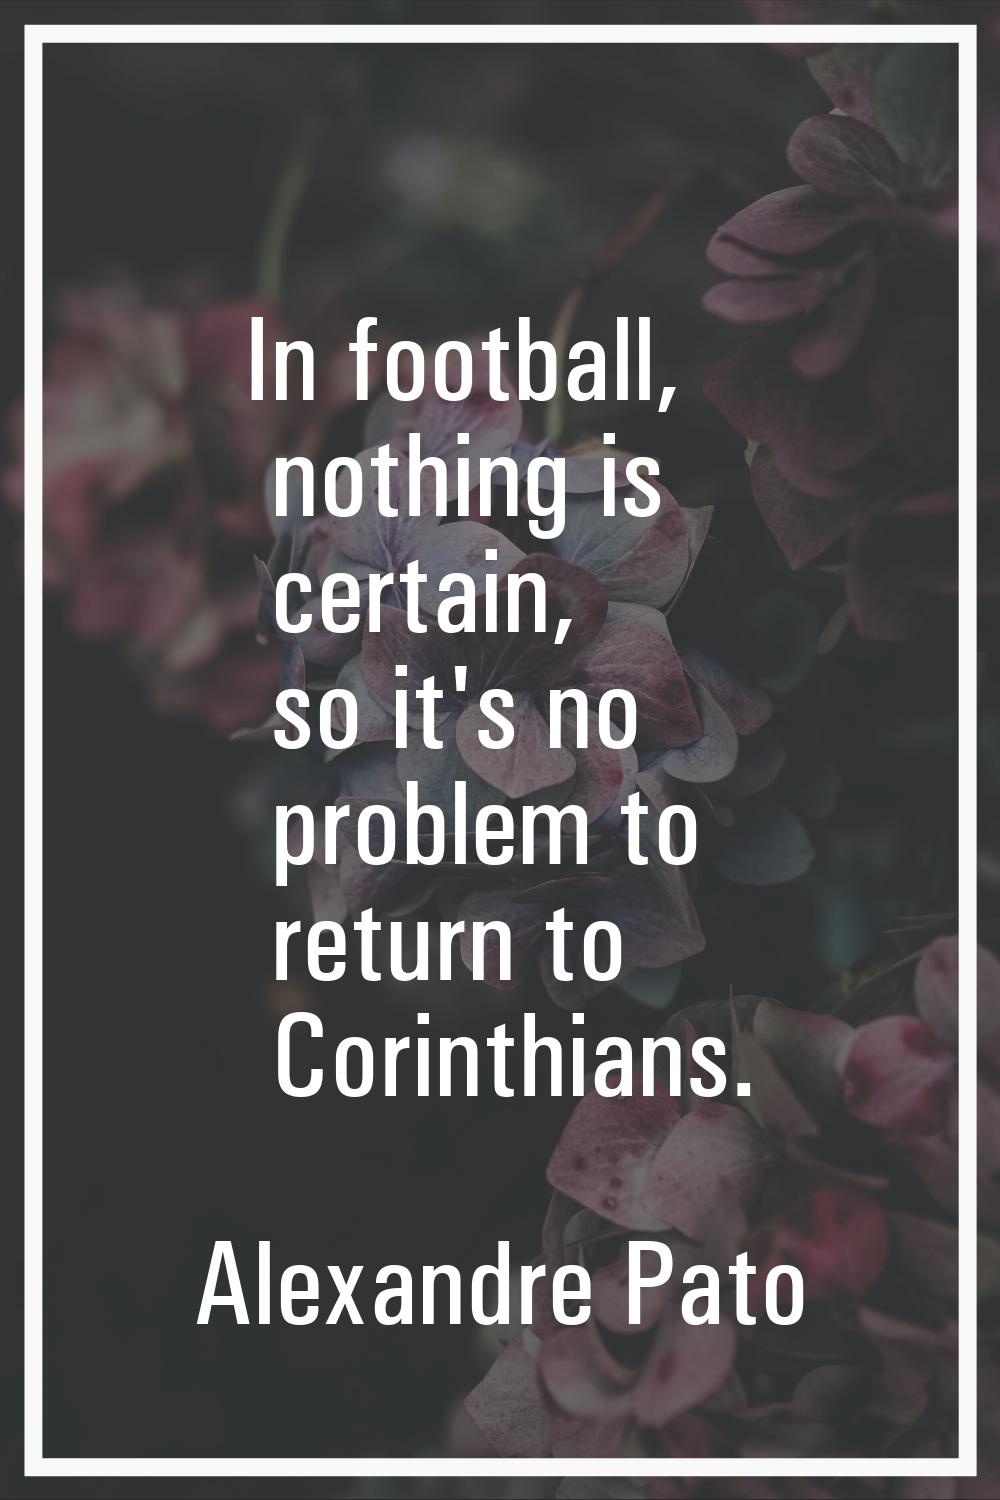 In football, nothing is certain, so it's no problem to return to Corinthians.